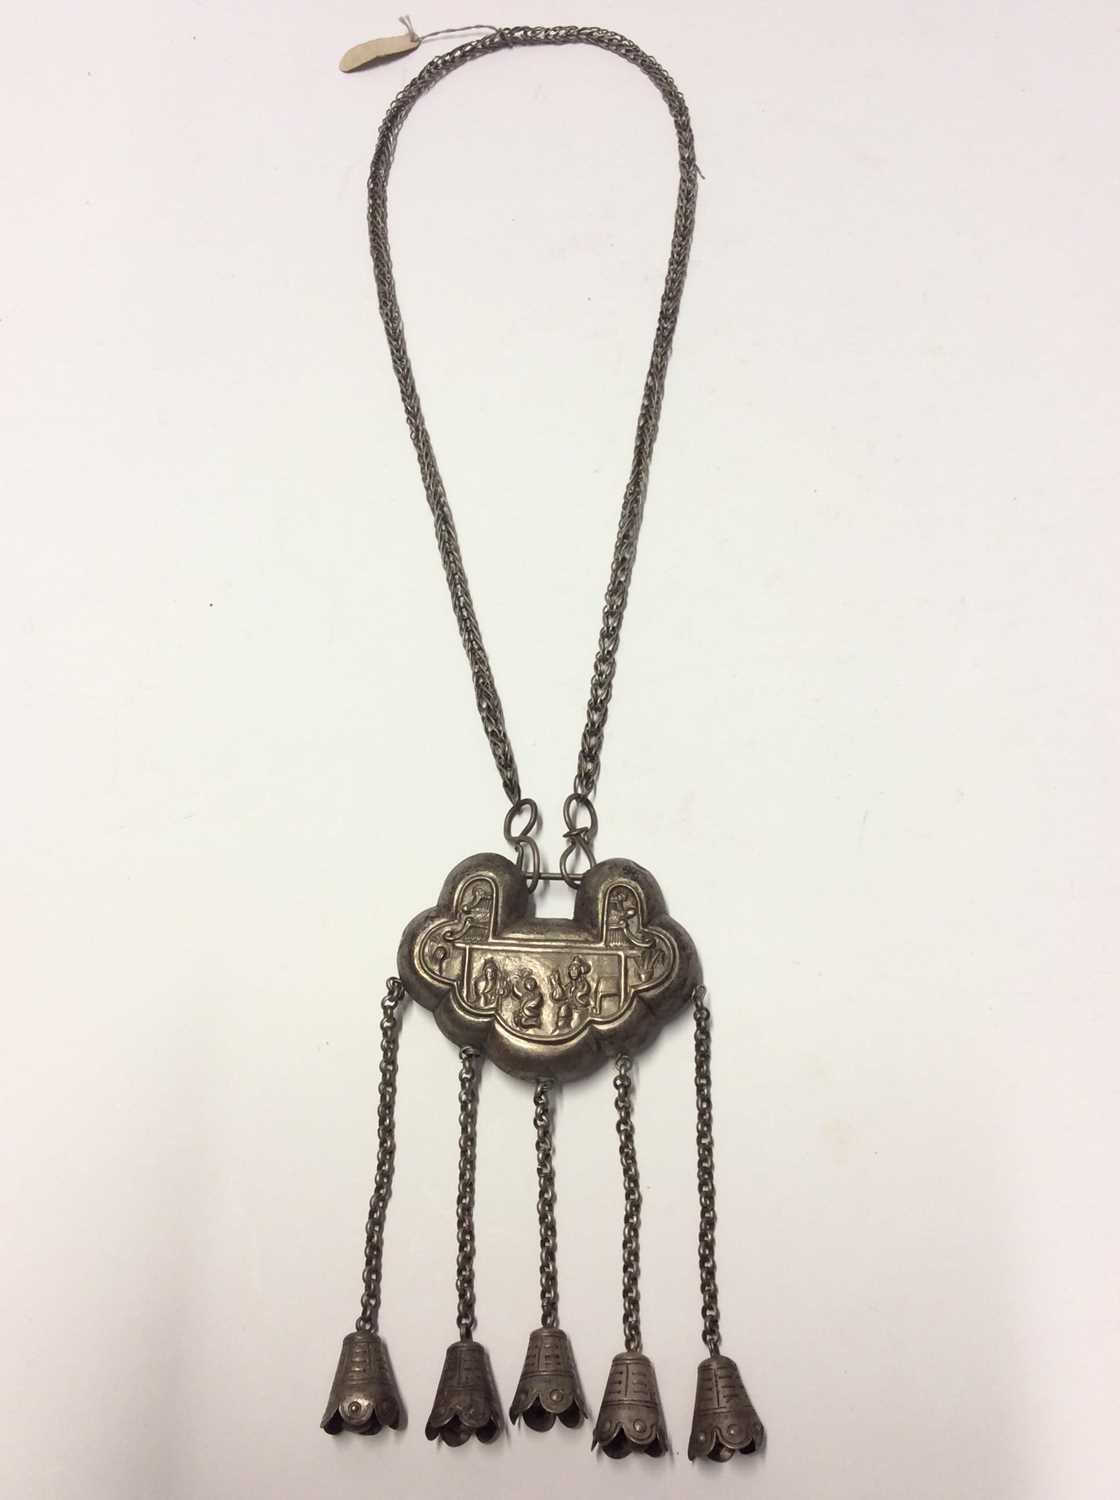 Lot 344 - Old Chinese white metal necklace with embossed panel depicting figures and Chinese characters, with bells on chain